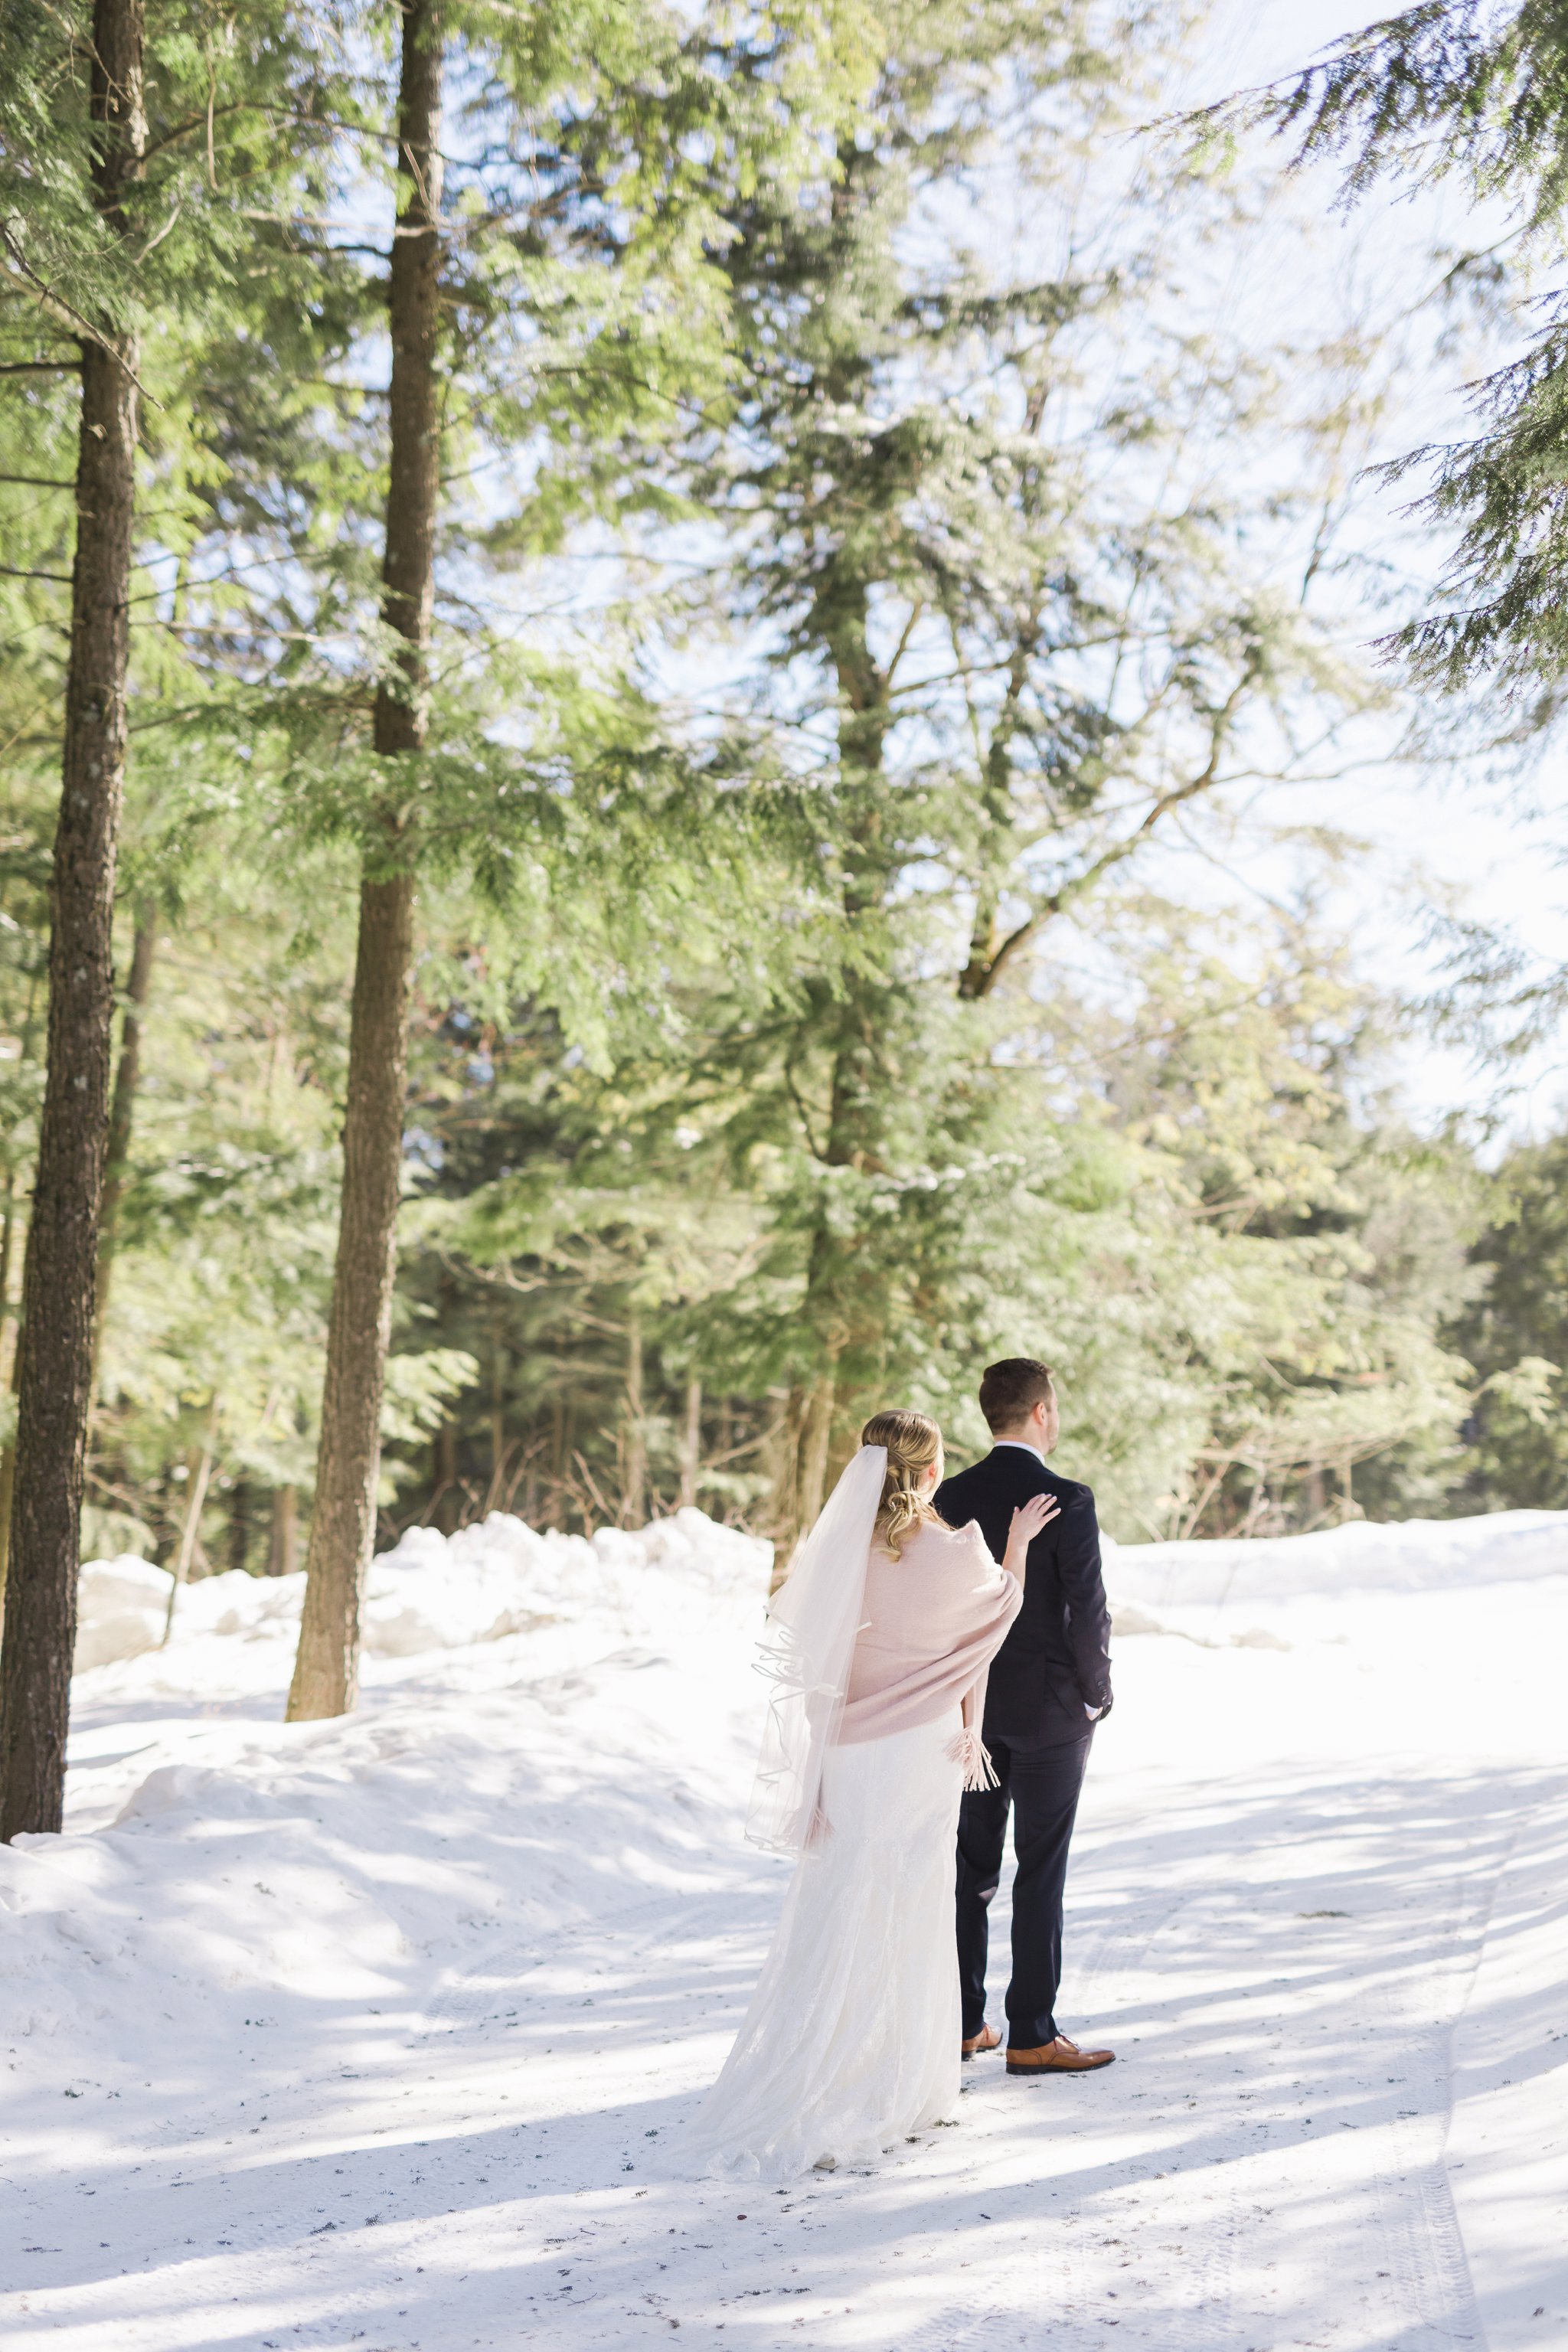 The first look at the Winter wedding at Le Belvedere